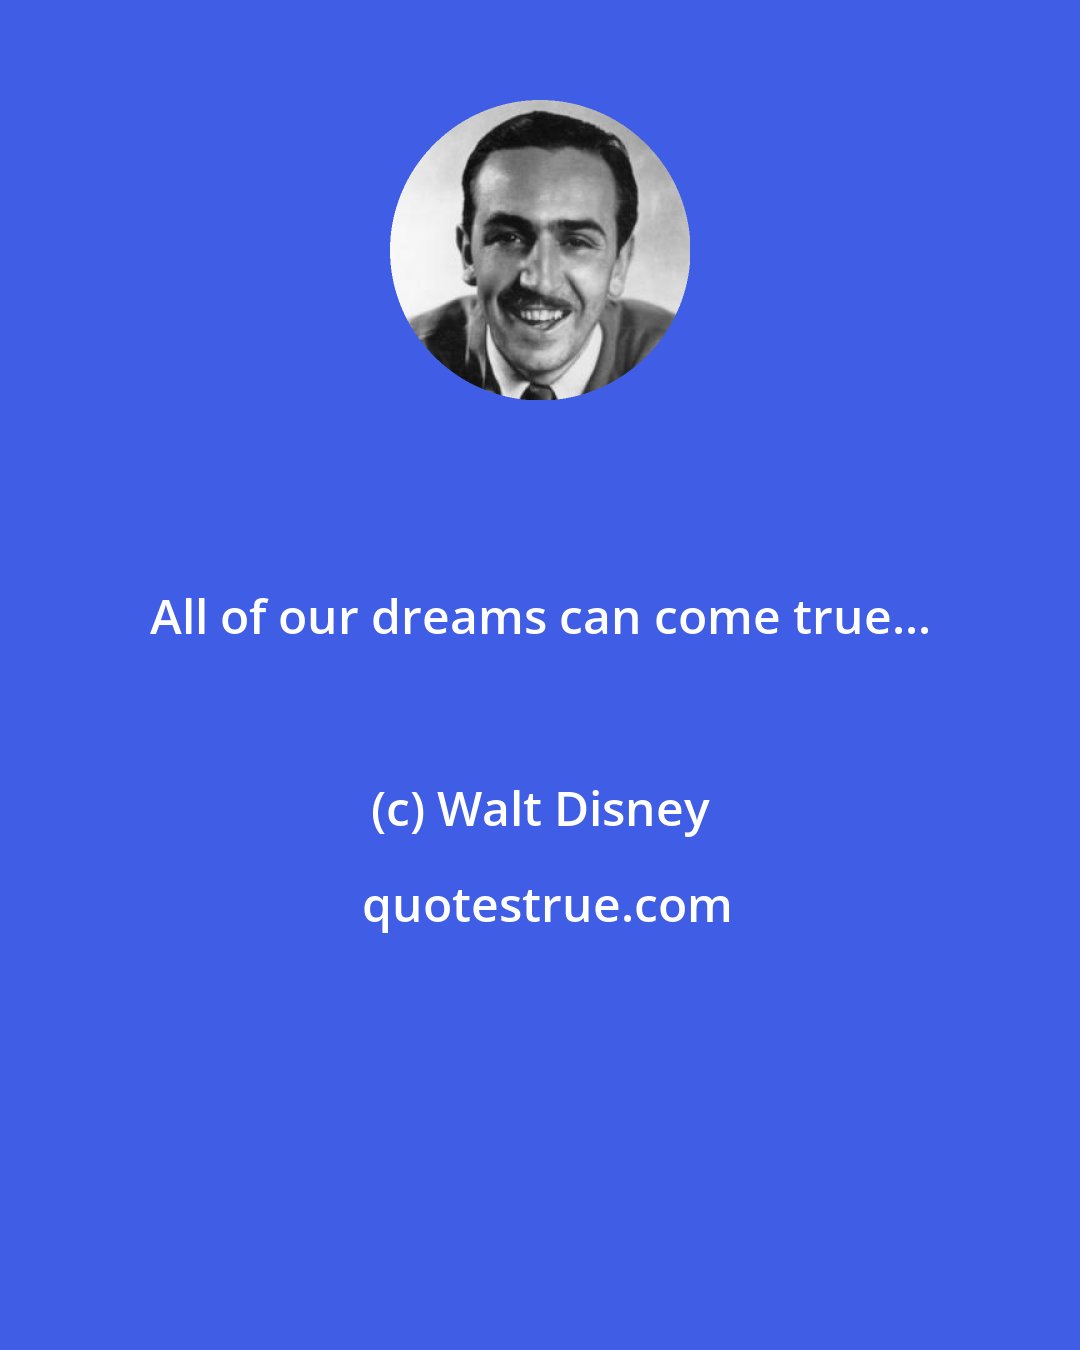 Walt Disney: All of our dreams can come true...